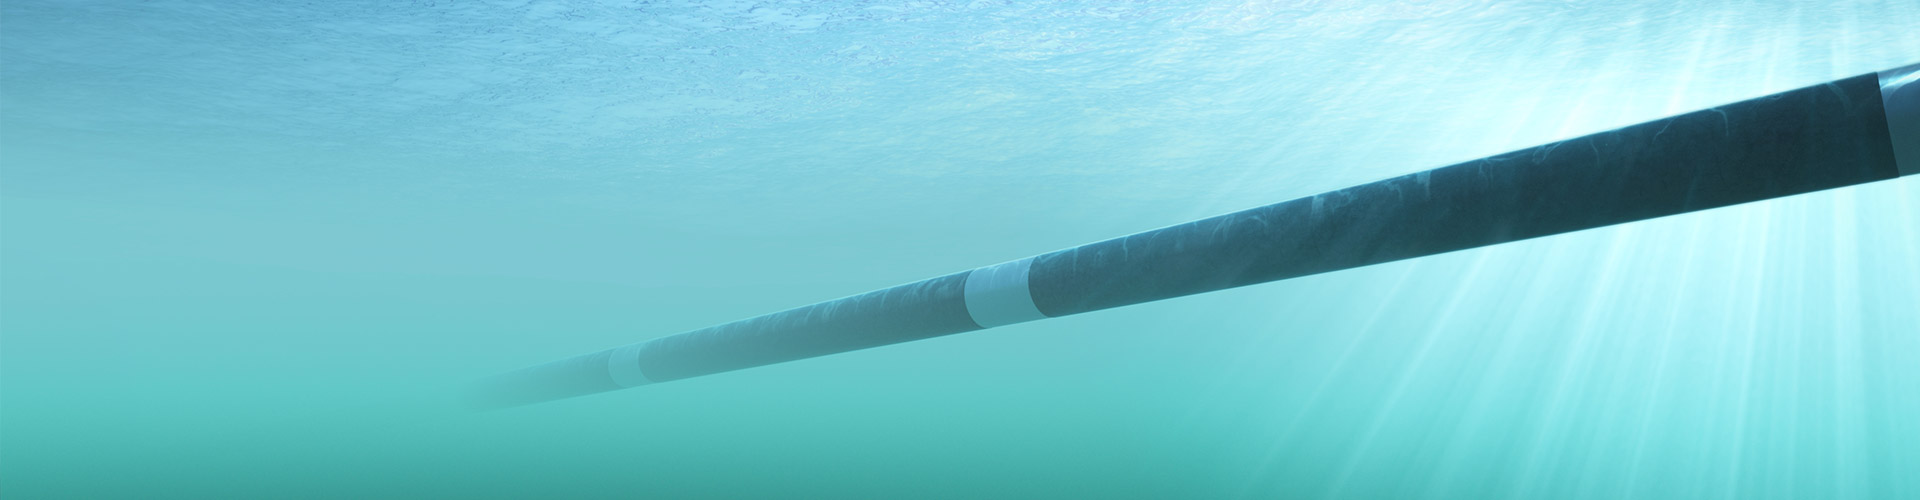 3D illustration of an underwater gas pipeline.